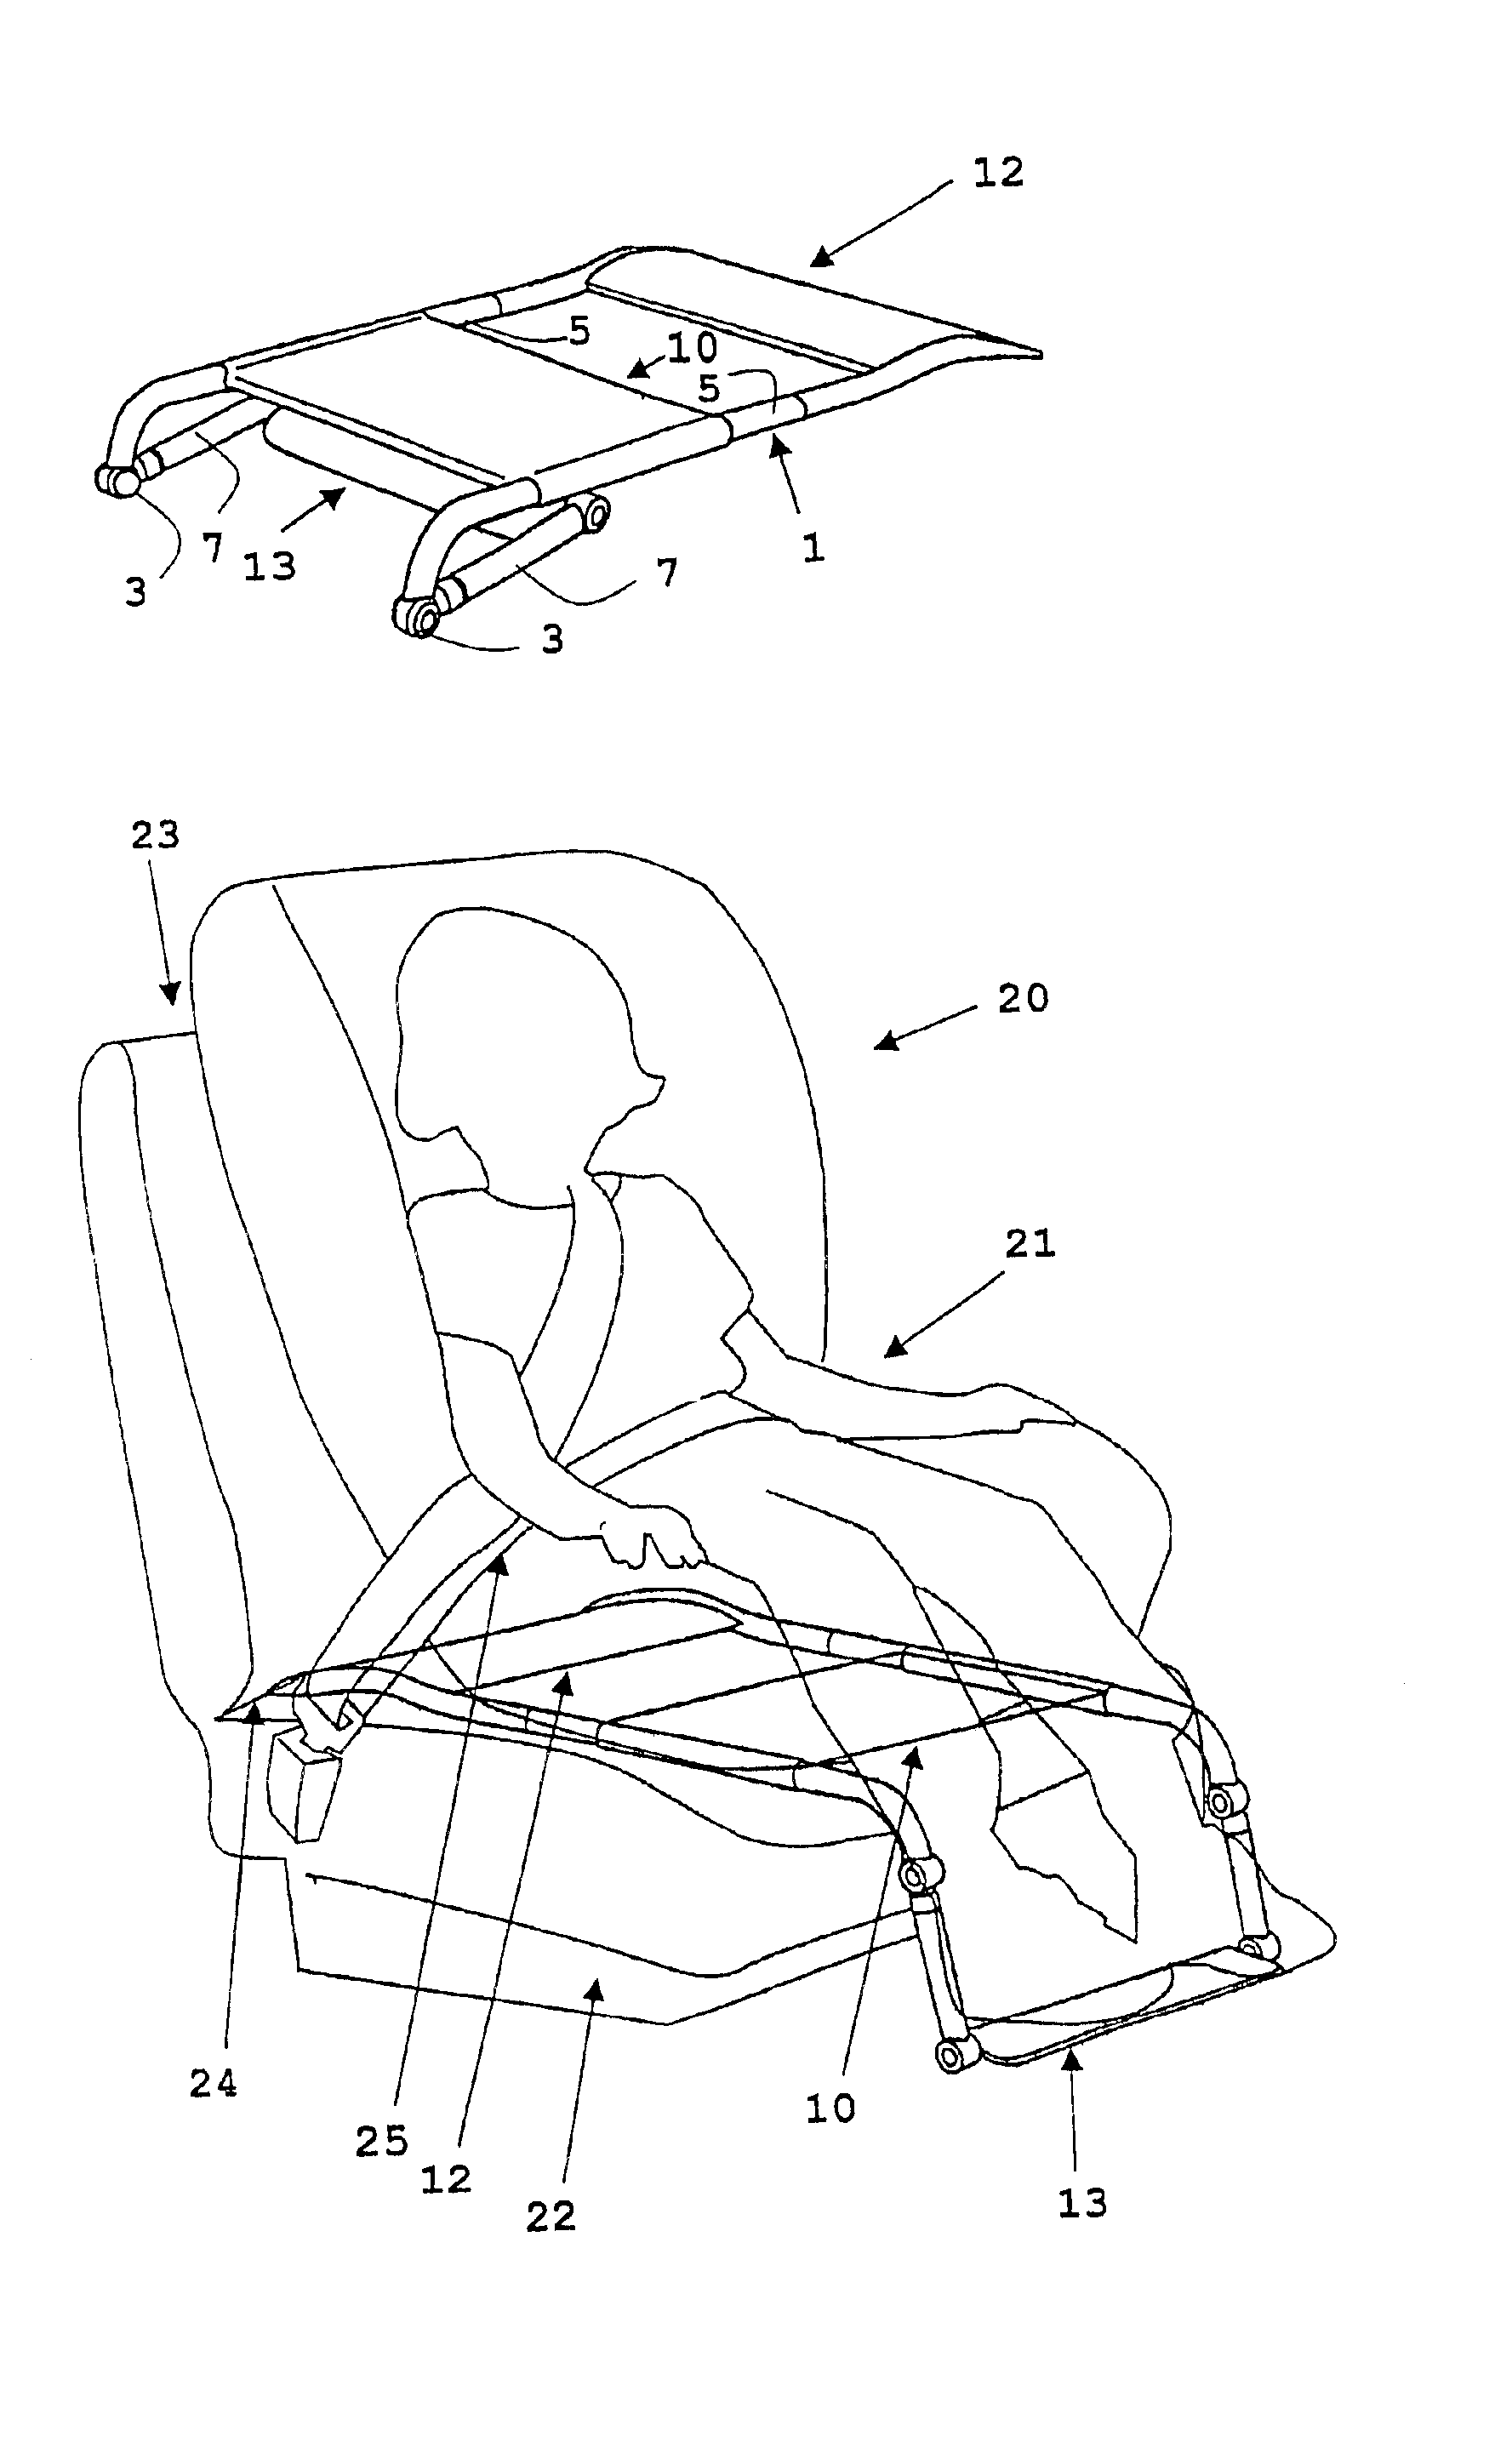 Footrest for a child safety seat